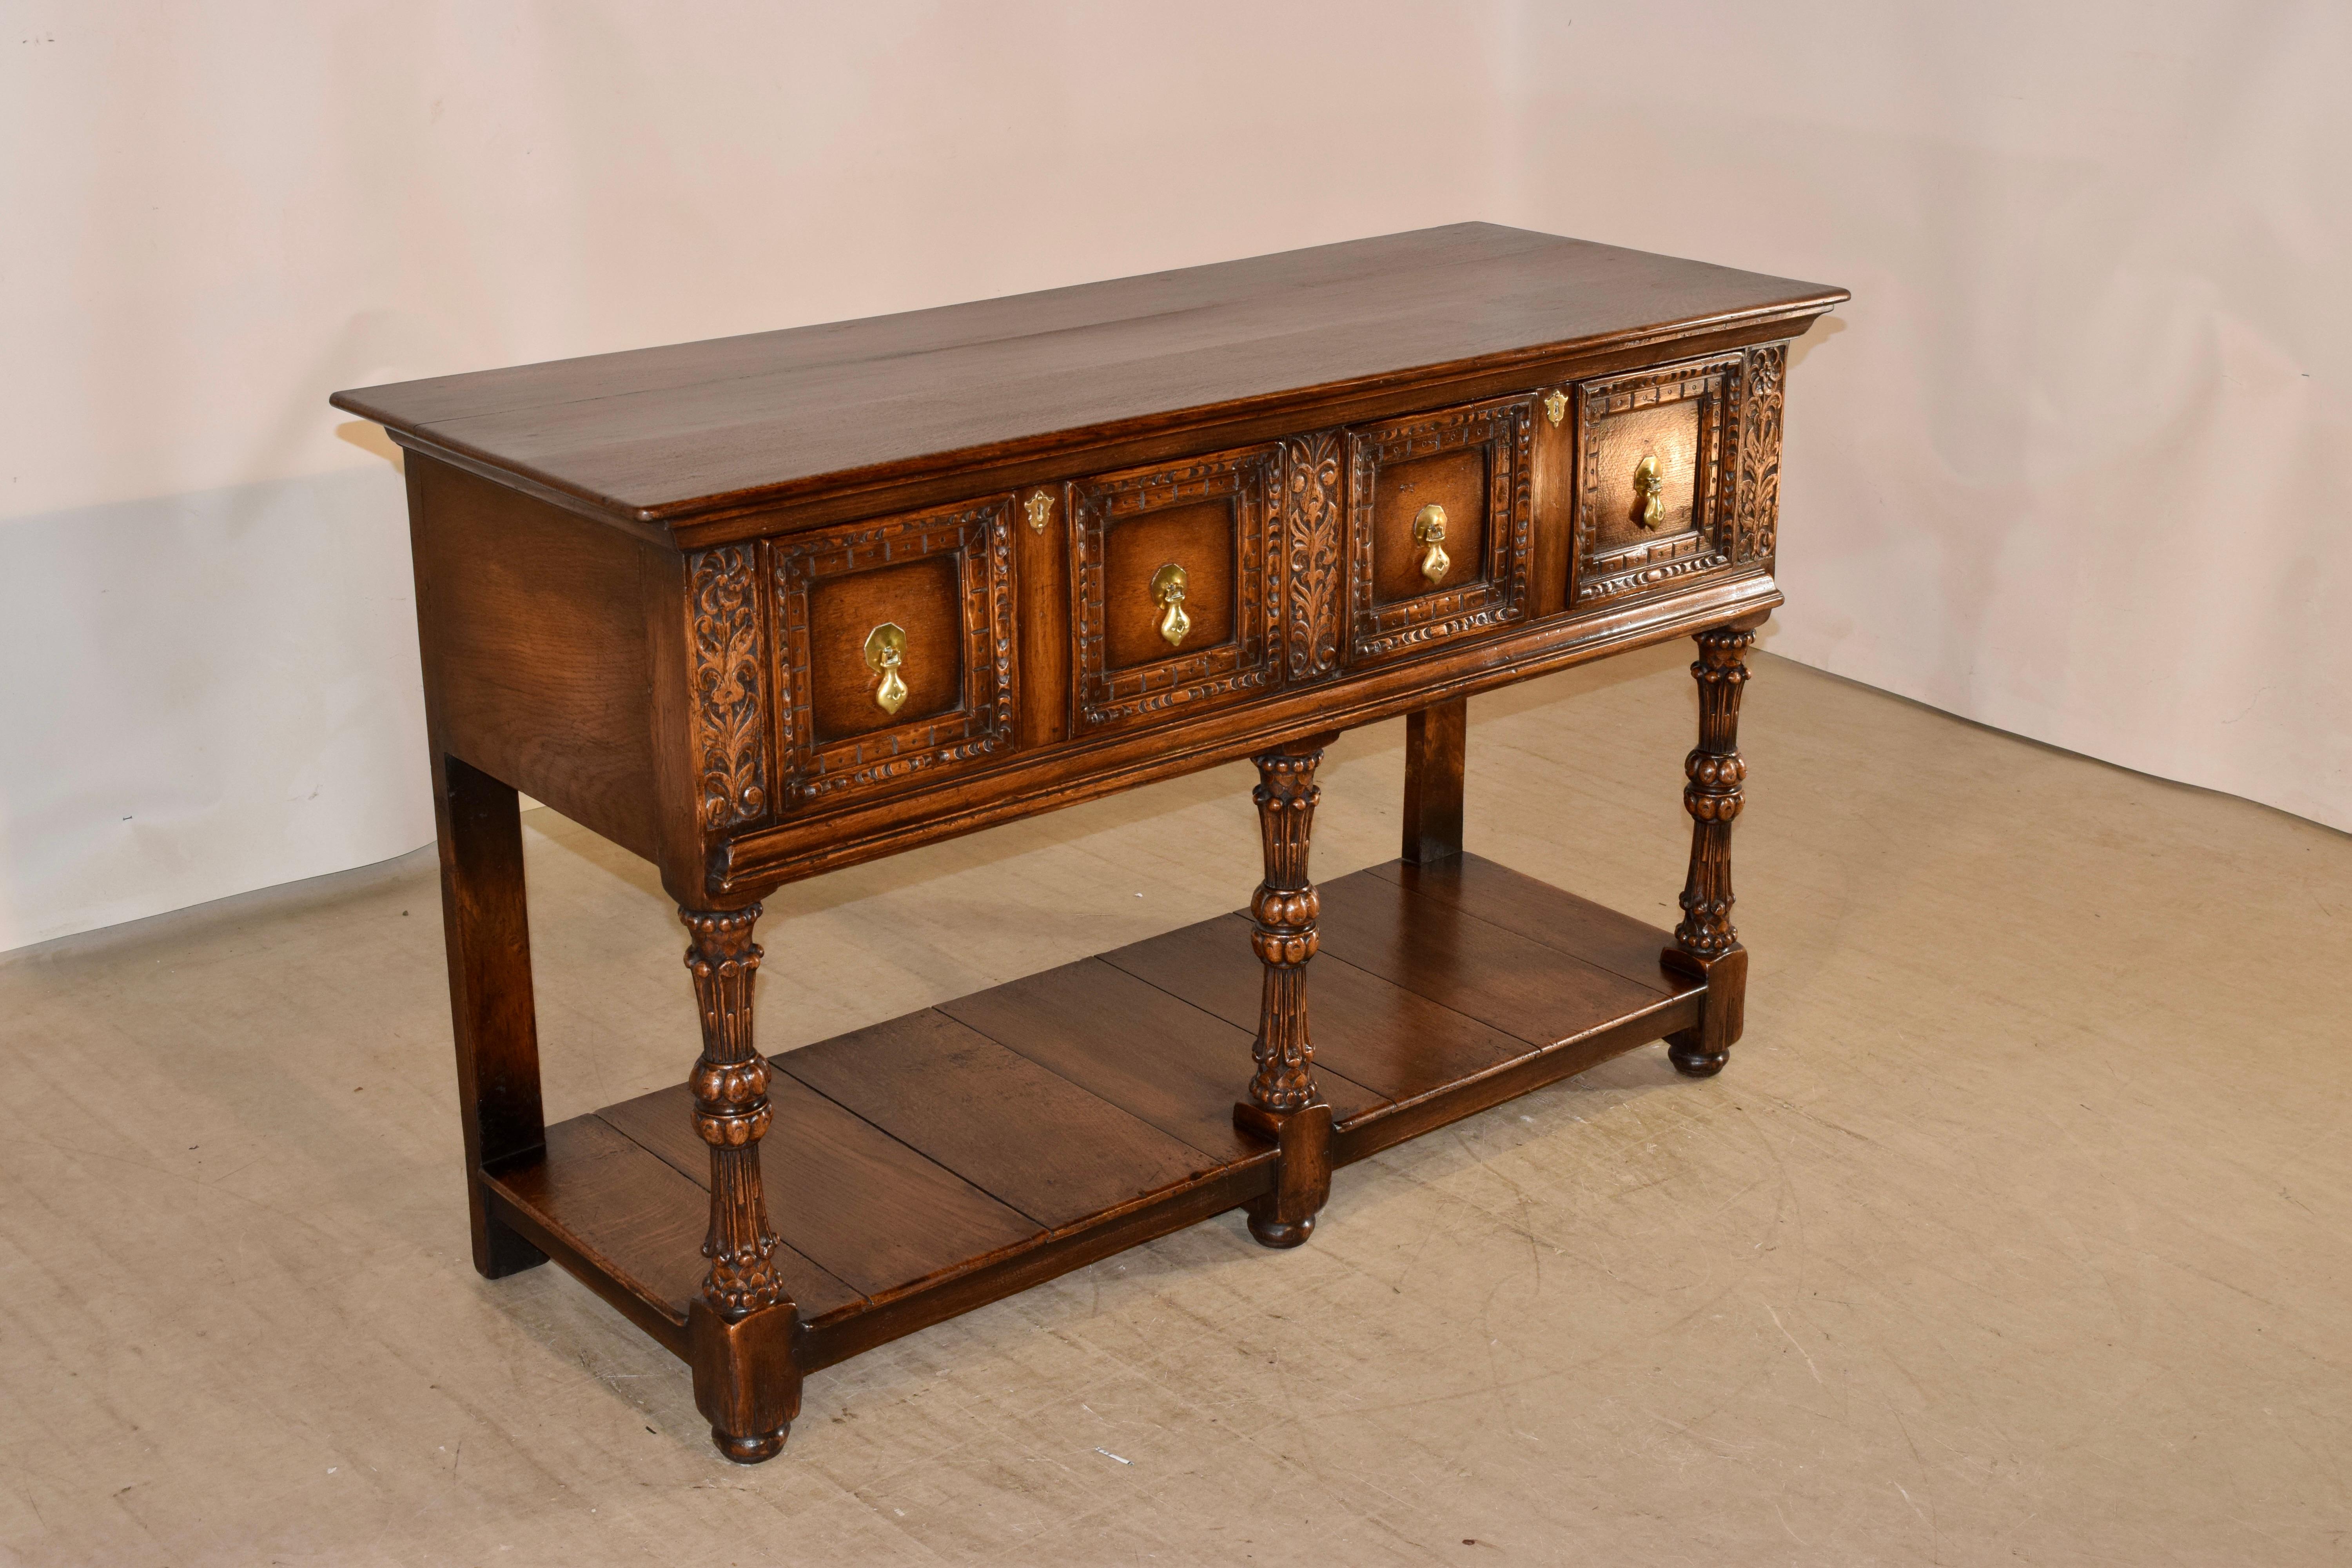 Hand-Carved 19th Century English Paneled Sideboard For Sale